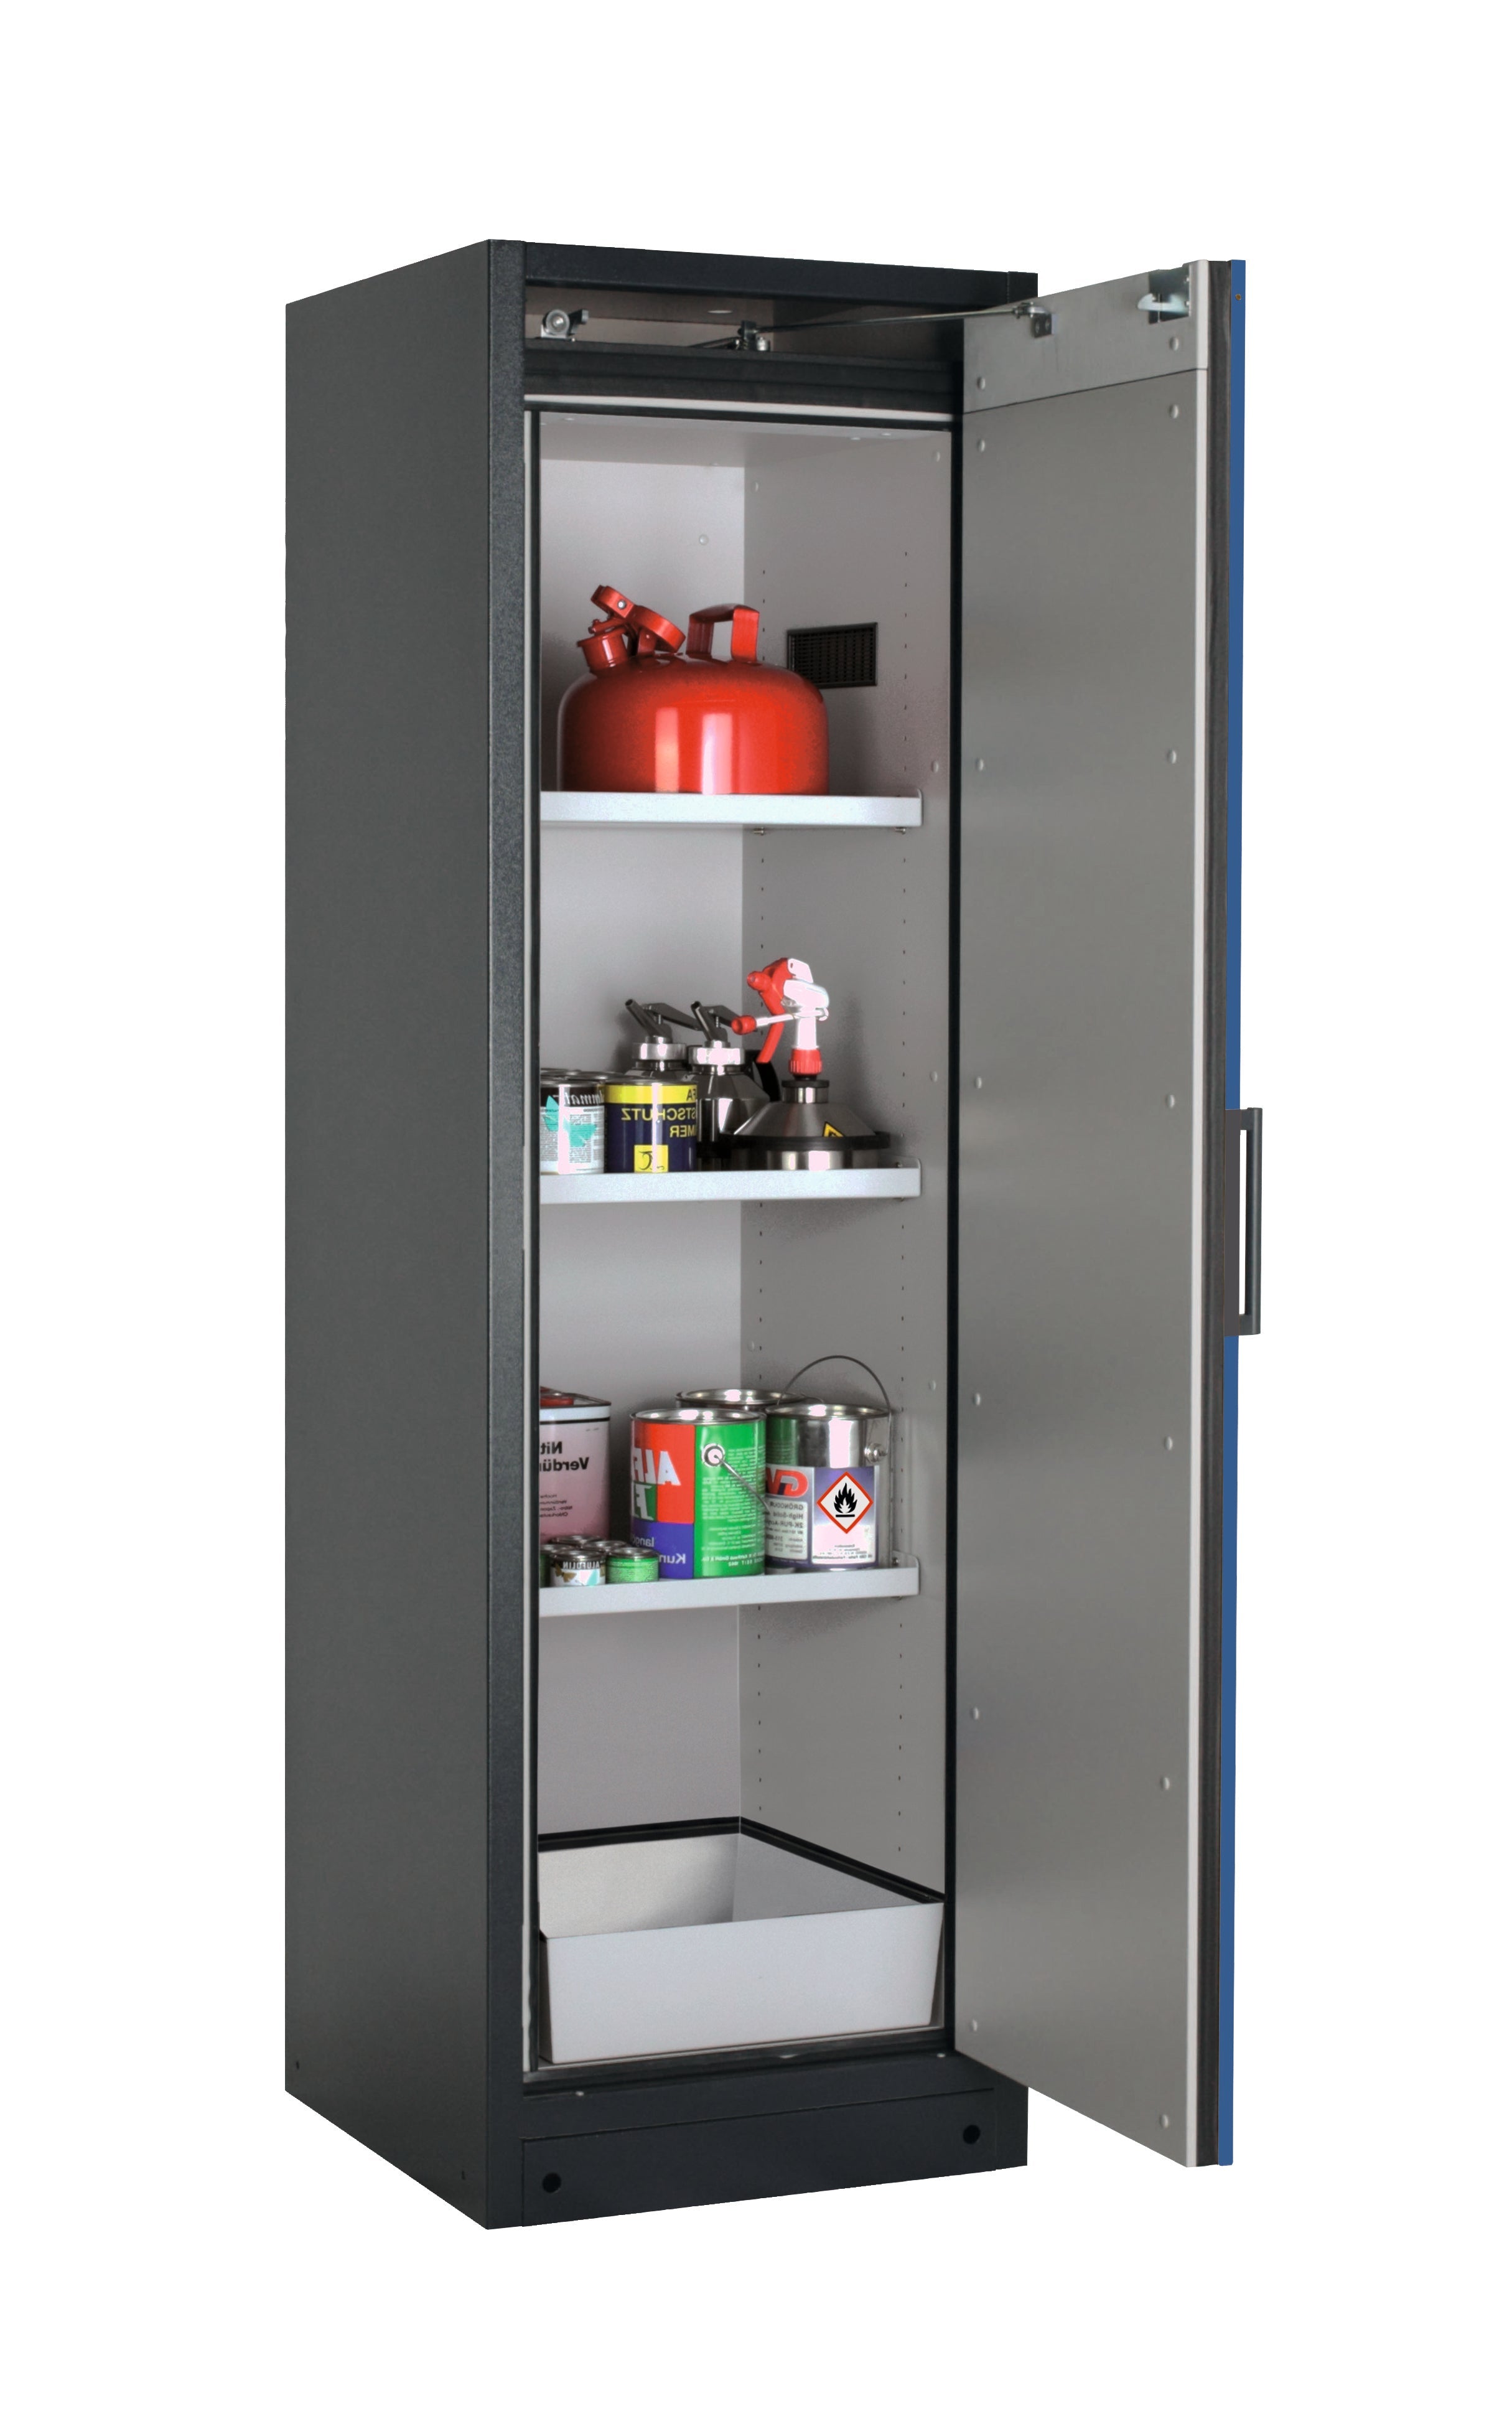 Type 90 safety storage cabinet Q-CLASSIC-90 model Q90.195.060.R in gentian blue RAL 5010 with 3x shelf standard (sheet steel),